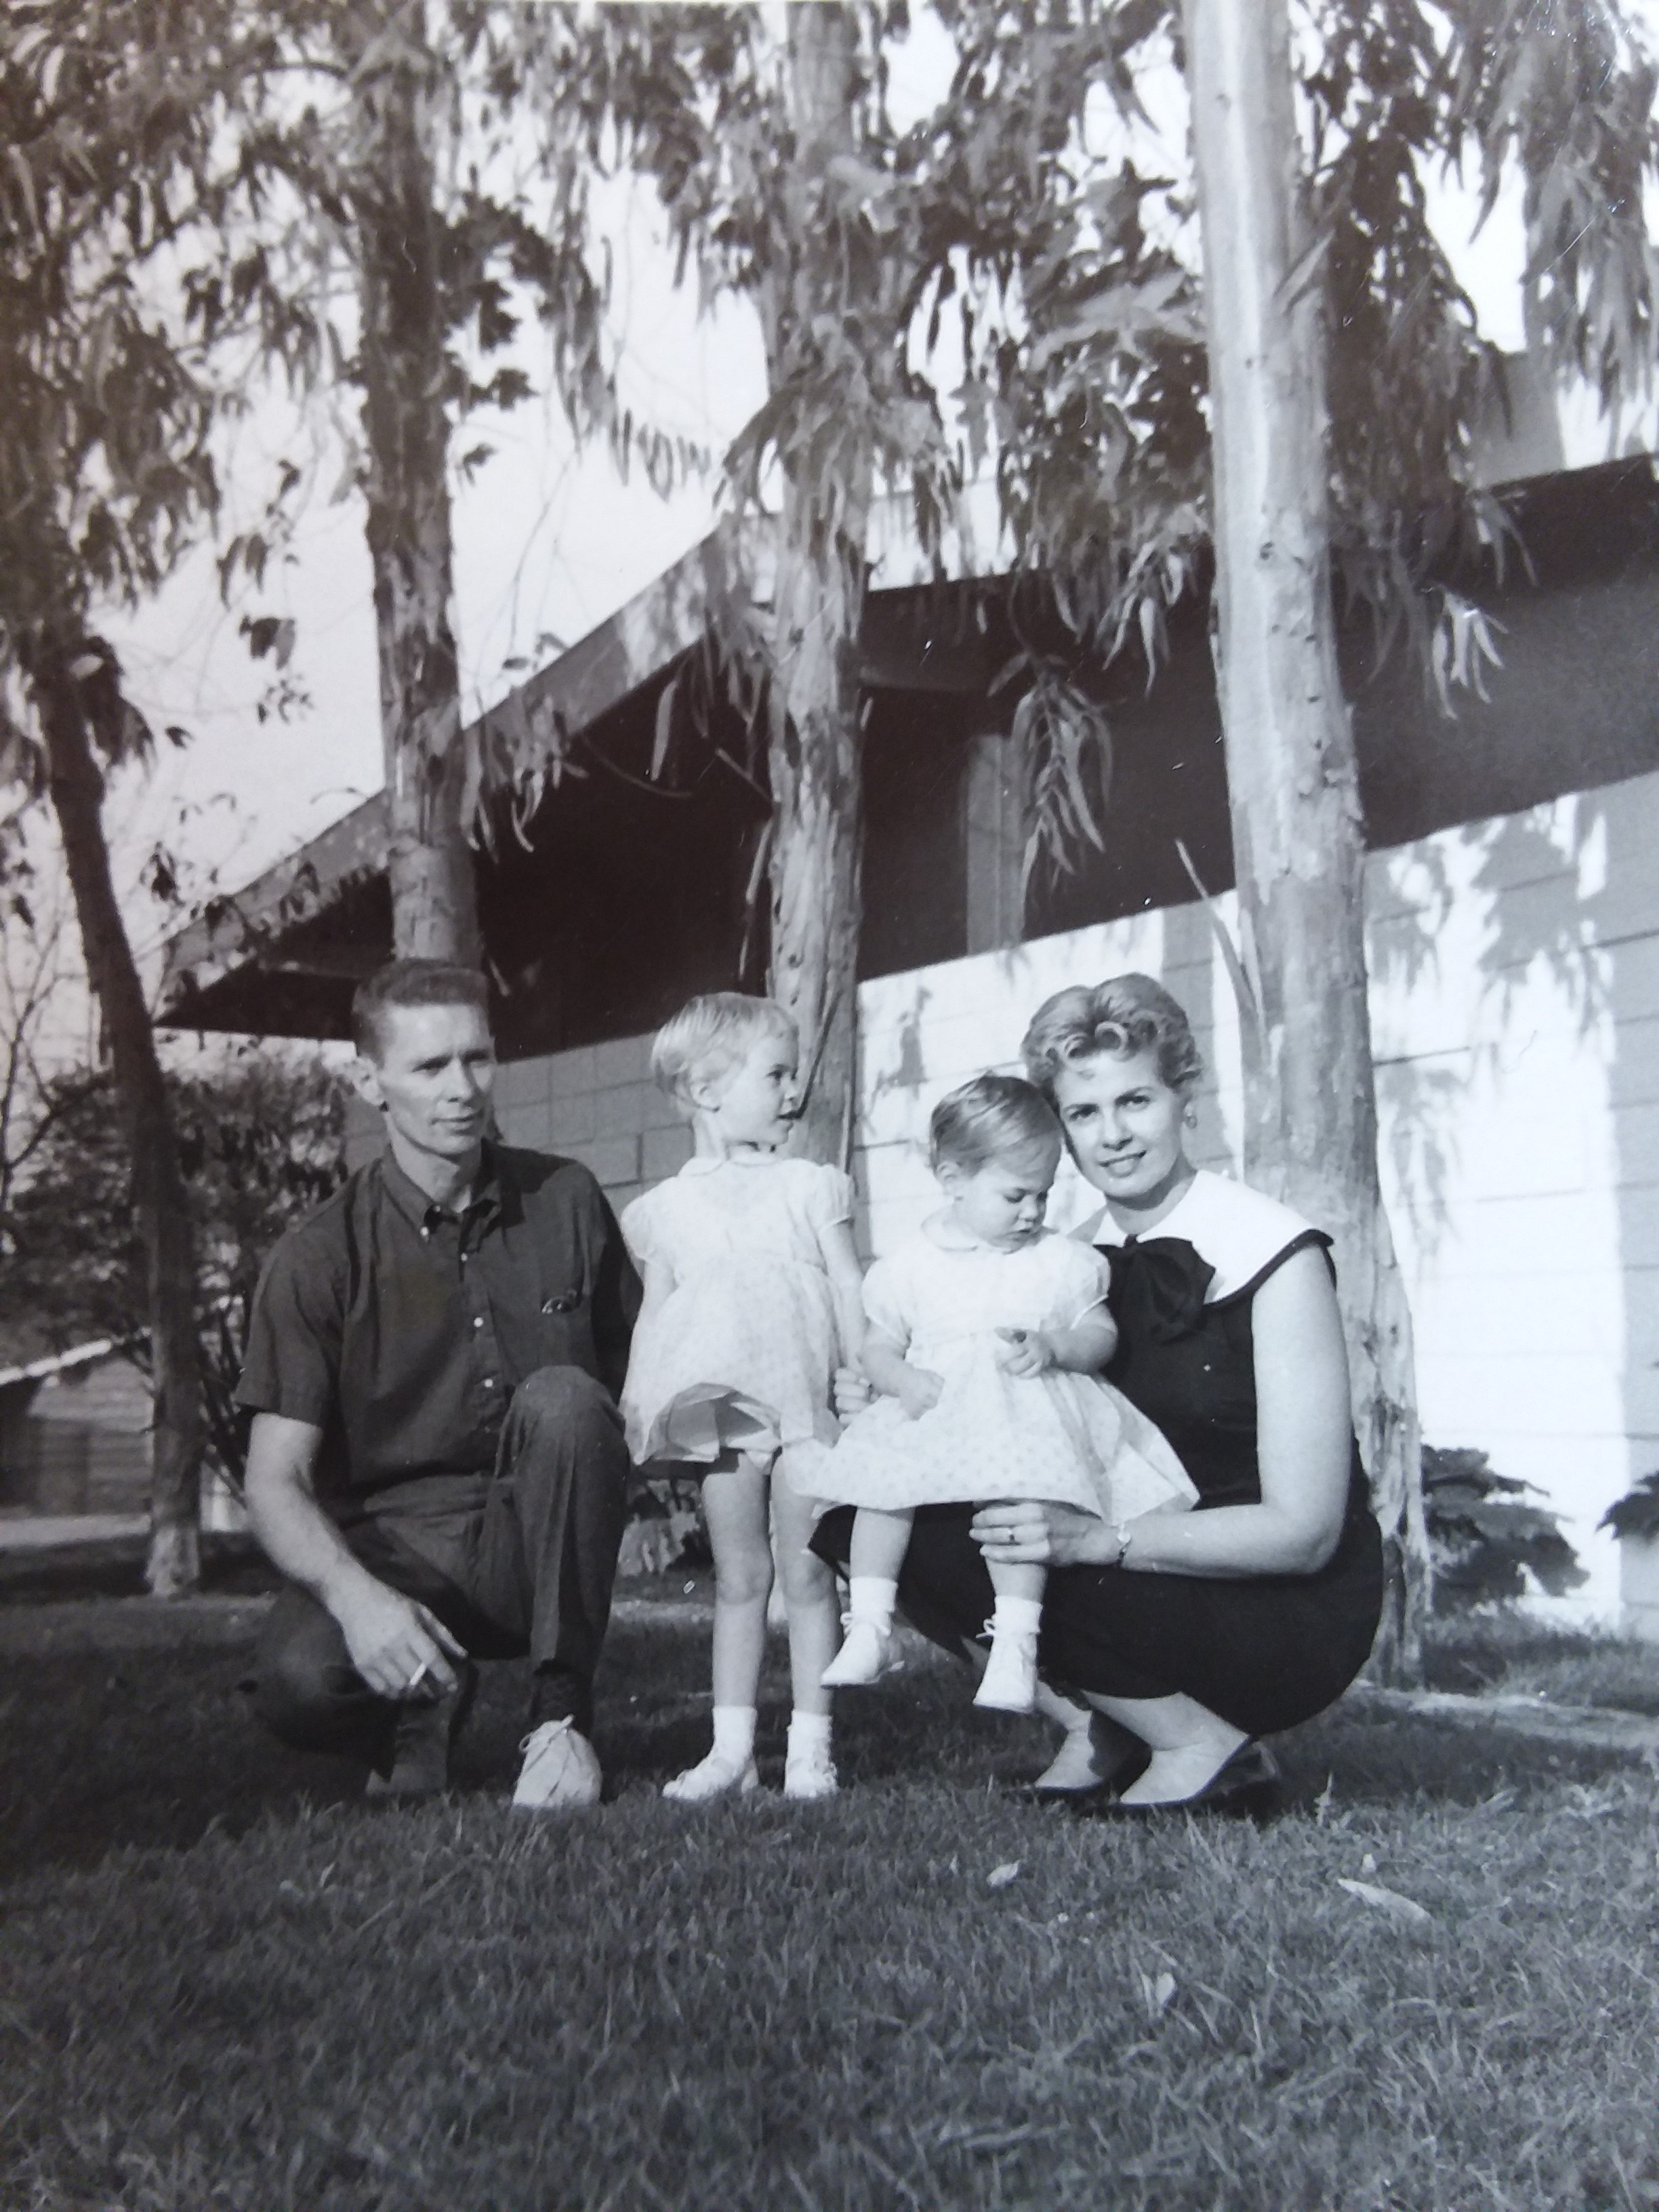  Nanette Burris Pickens with her husband, Dick, and two daughters, c. mid/late 1950s  Nanette lived at 3360 Blair Dr. in the Hollywood Hills near Universal-International Studio when she worked for Jerry Lewis and met Bob. She was an assistant/secreta